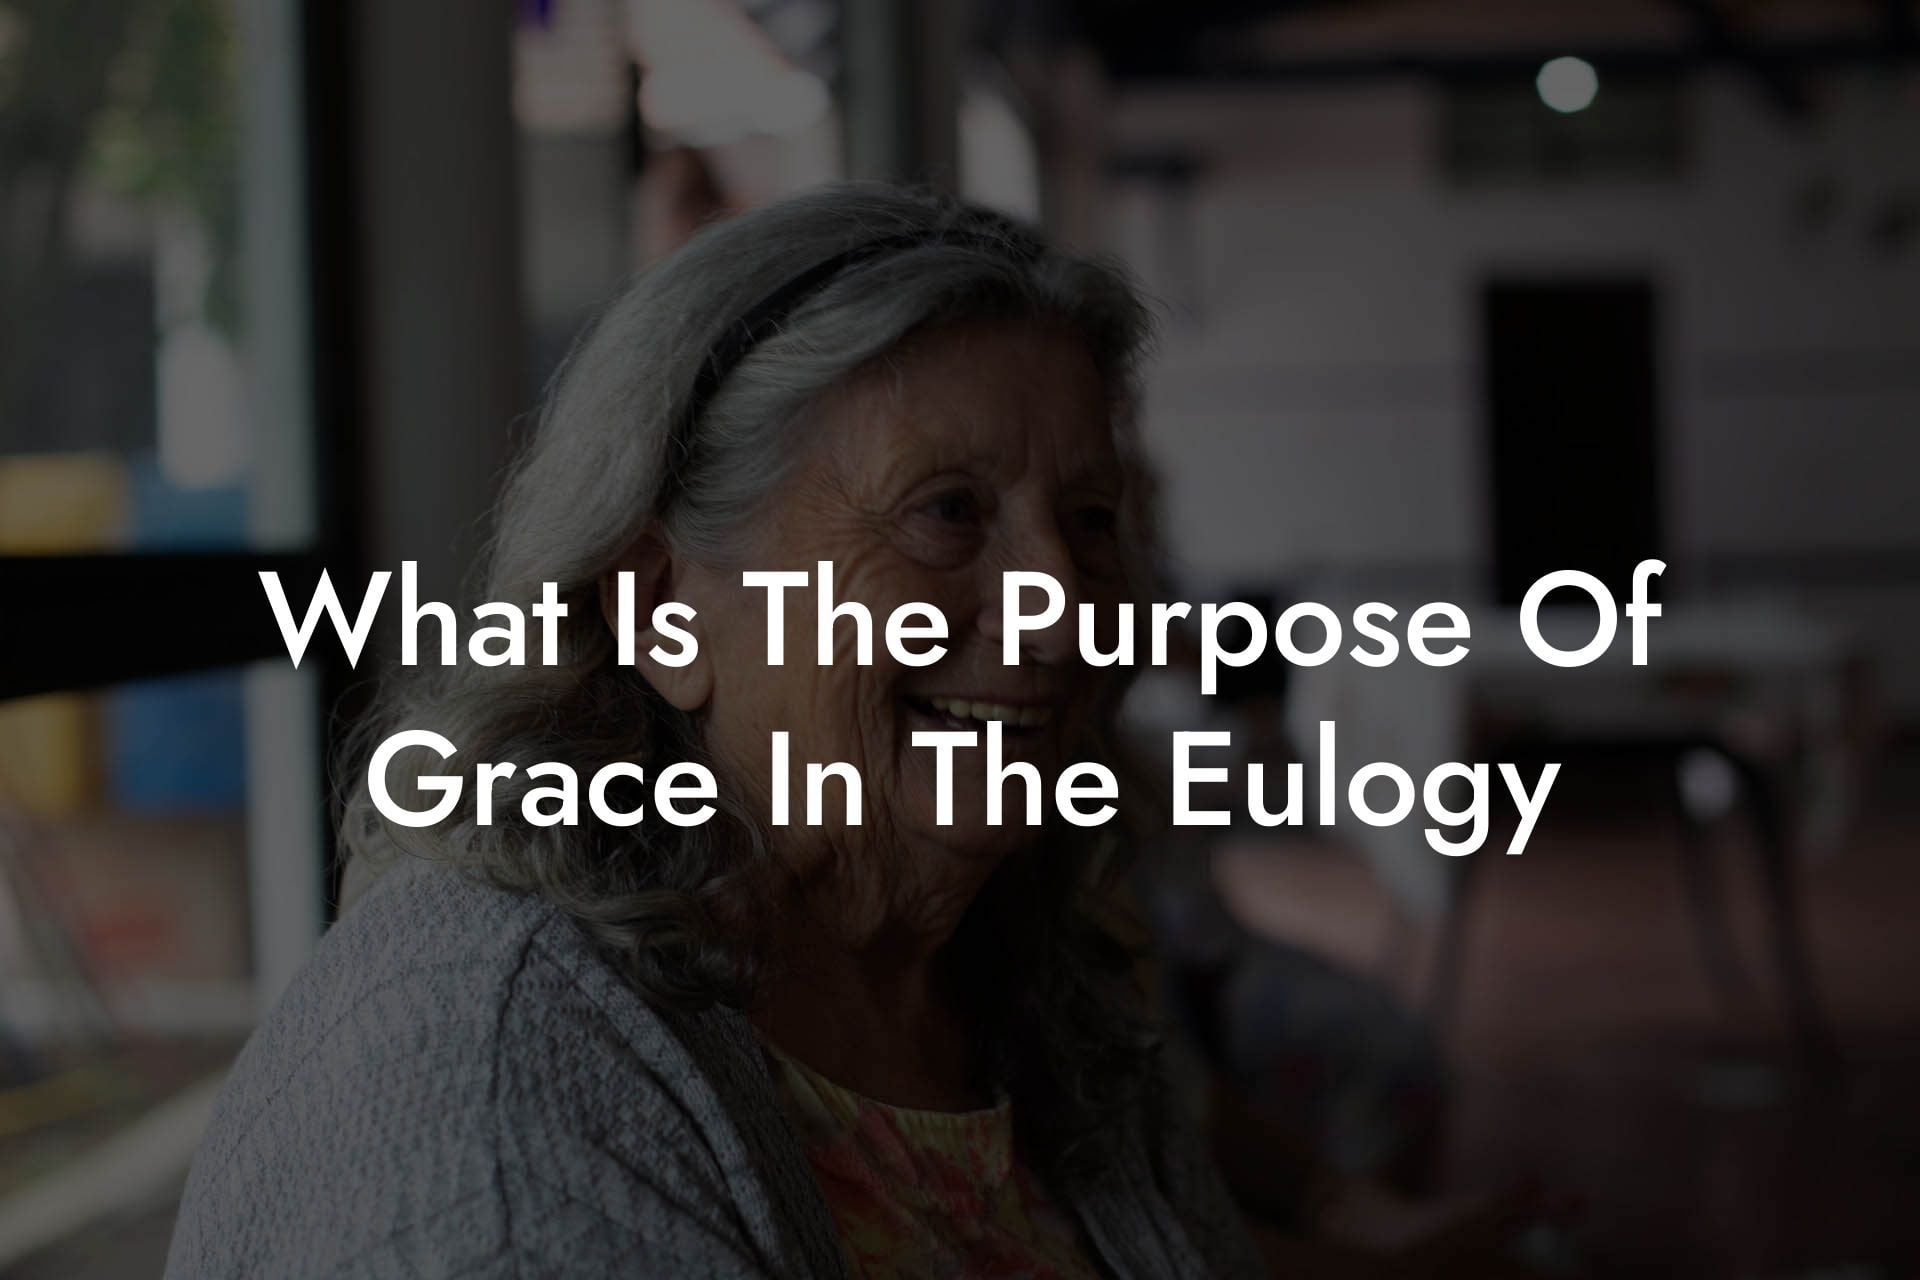 What Is The Purpose Of Grace In The Eulogy